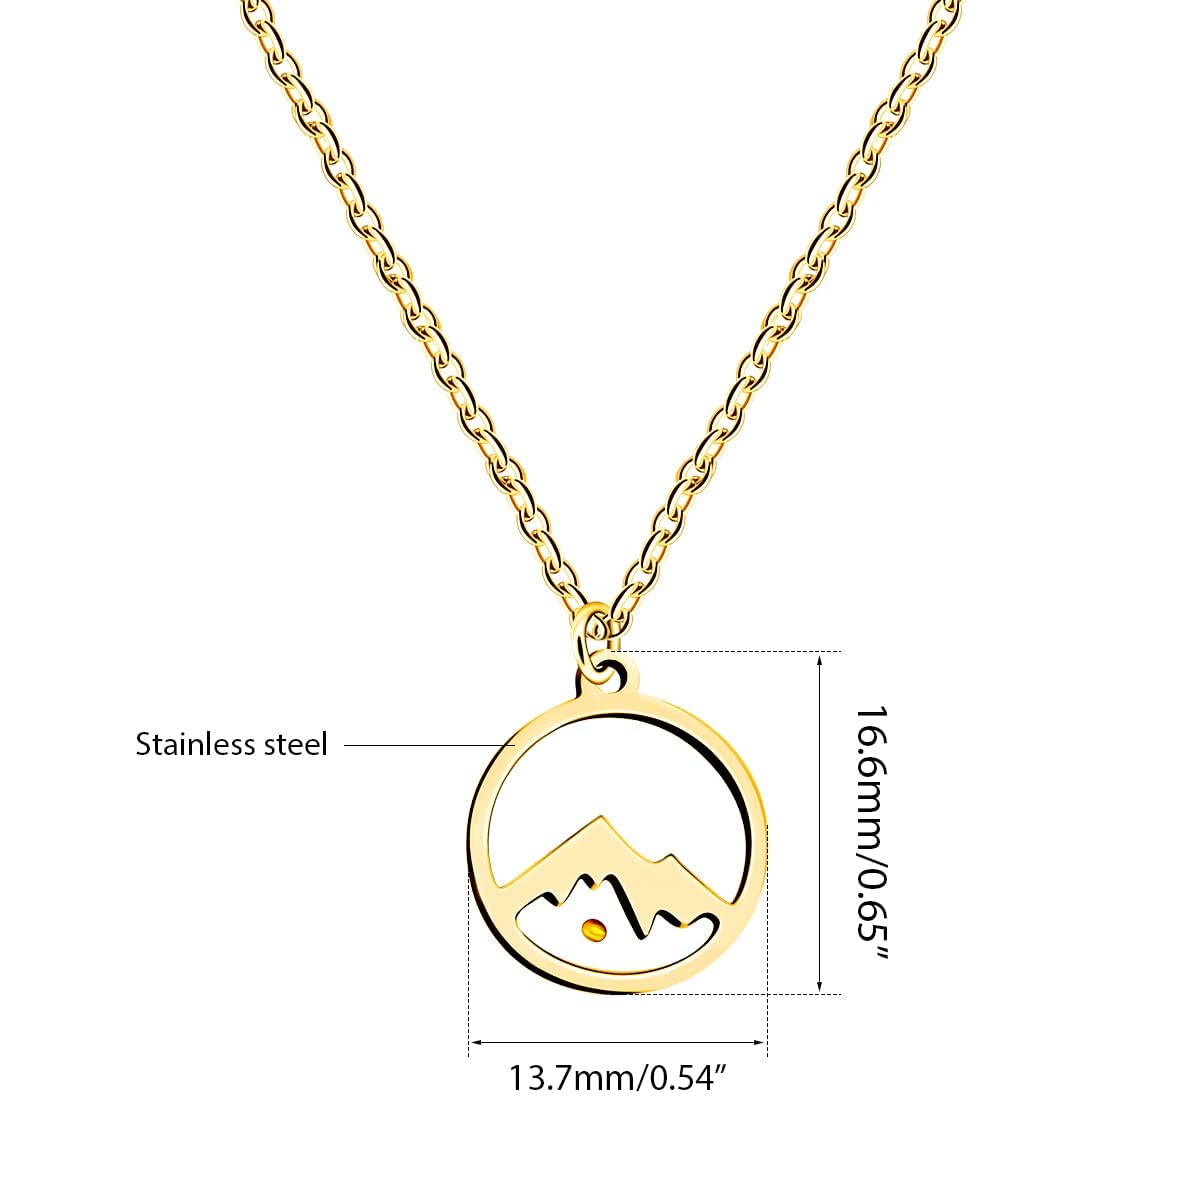 Uloveido Stainless Steel Mustard Seed Pendant Necklace Christian Baptism Faith Gift with Box Y1030